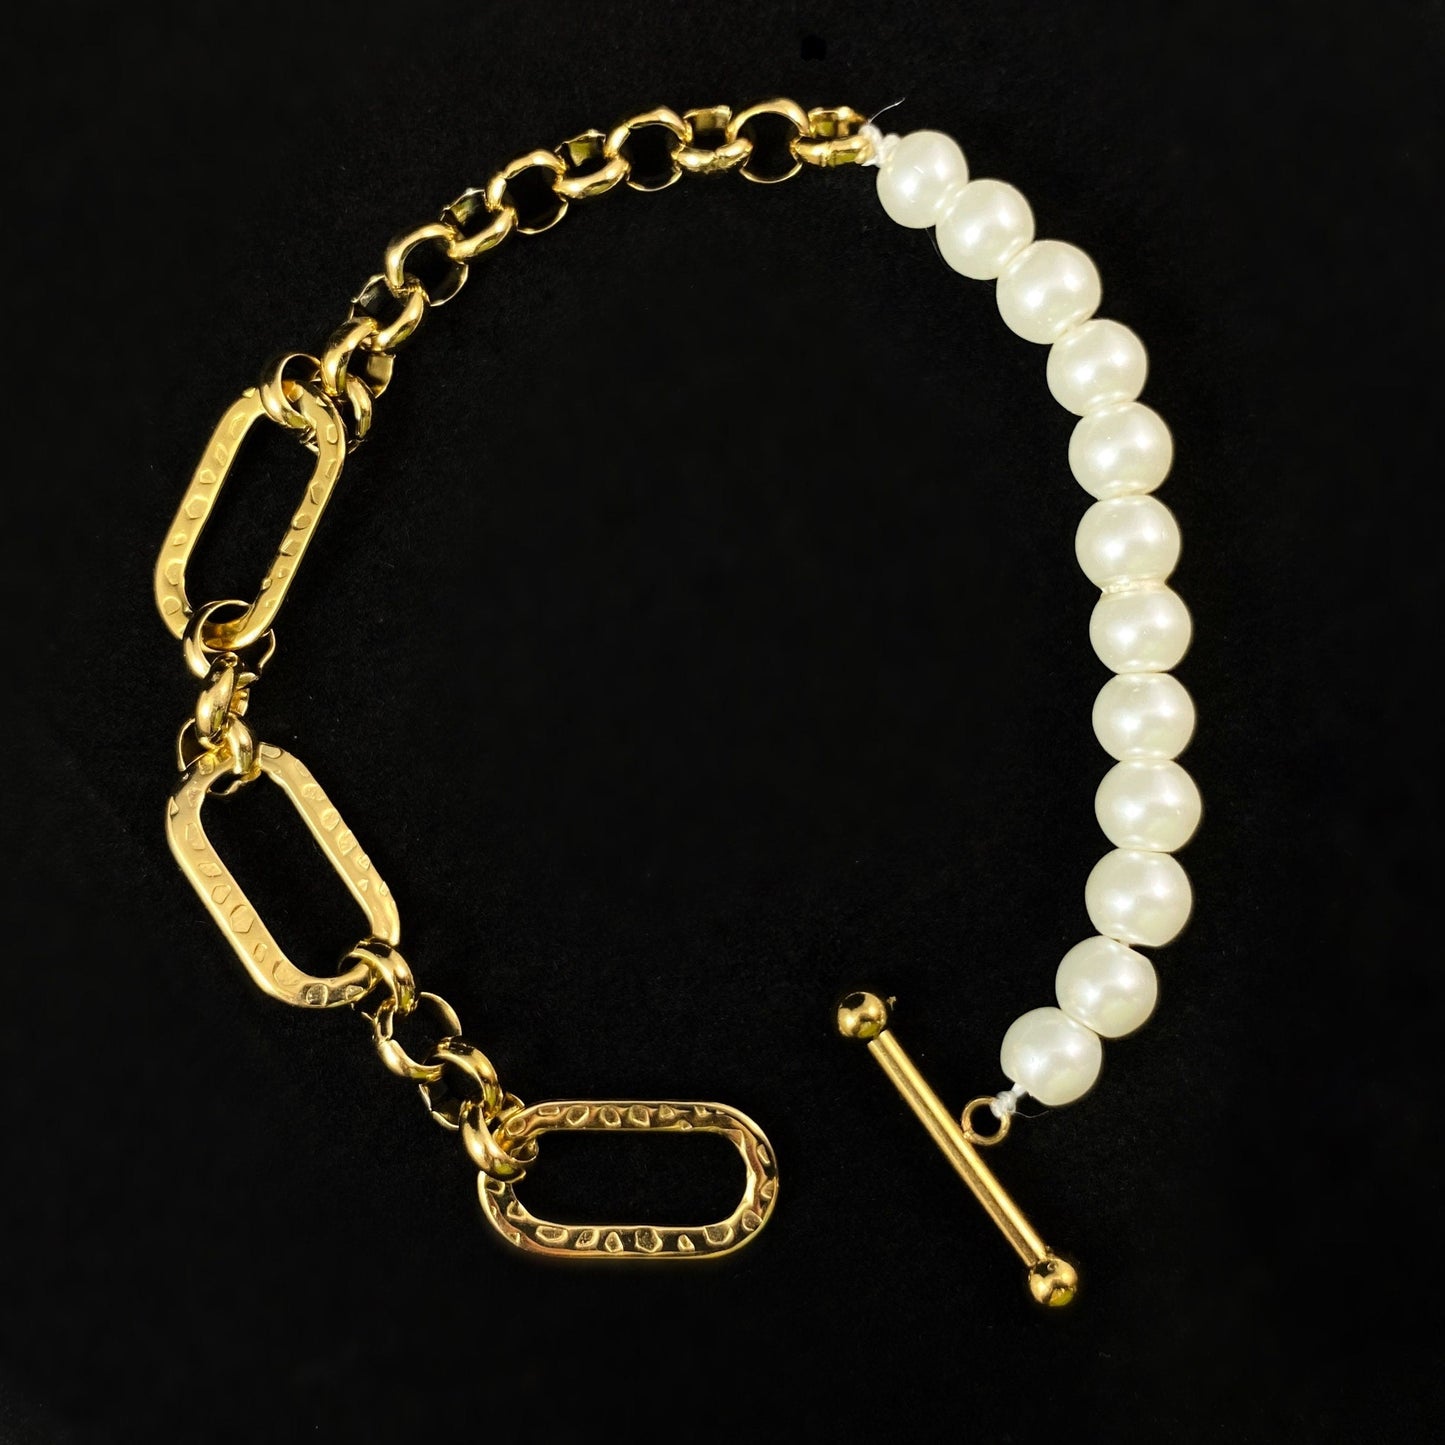 White Pearl Bracelet with Chunky Gold Chain and a Decorative Chain Link Toggle Clasp